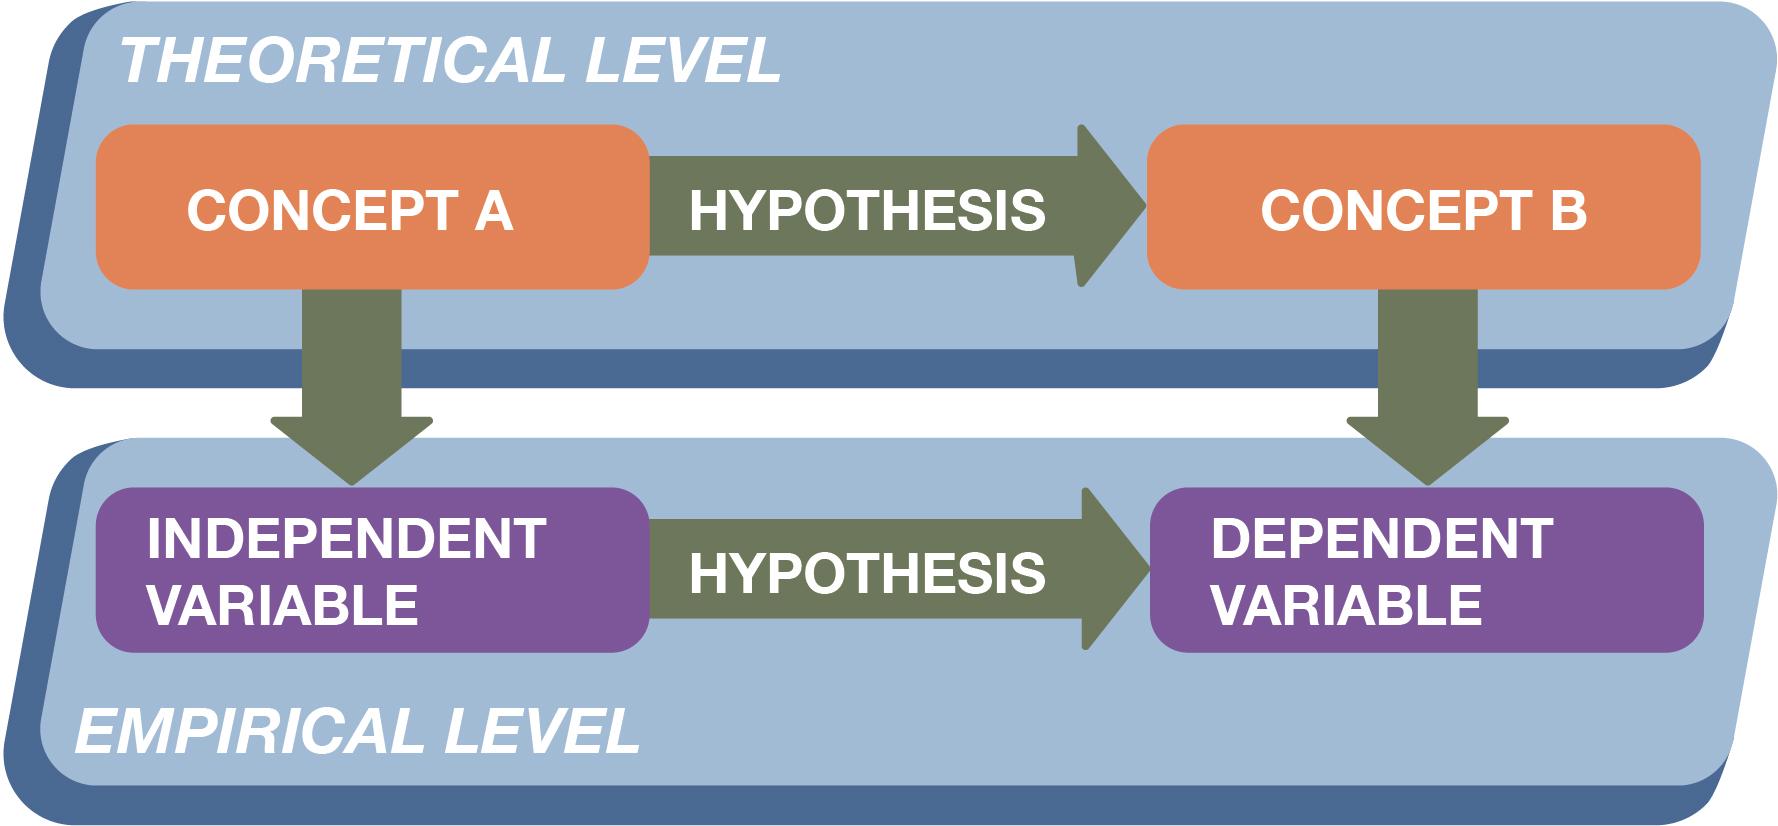 A two-level diagram with concept A and concept B linked by a hypothesis on the theoretical level, and the independent variable and dependent variable linked by a hypothesis on the empirical level.